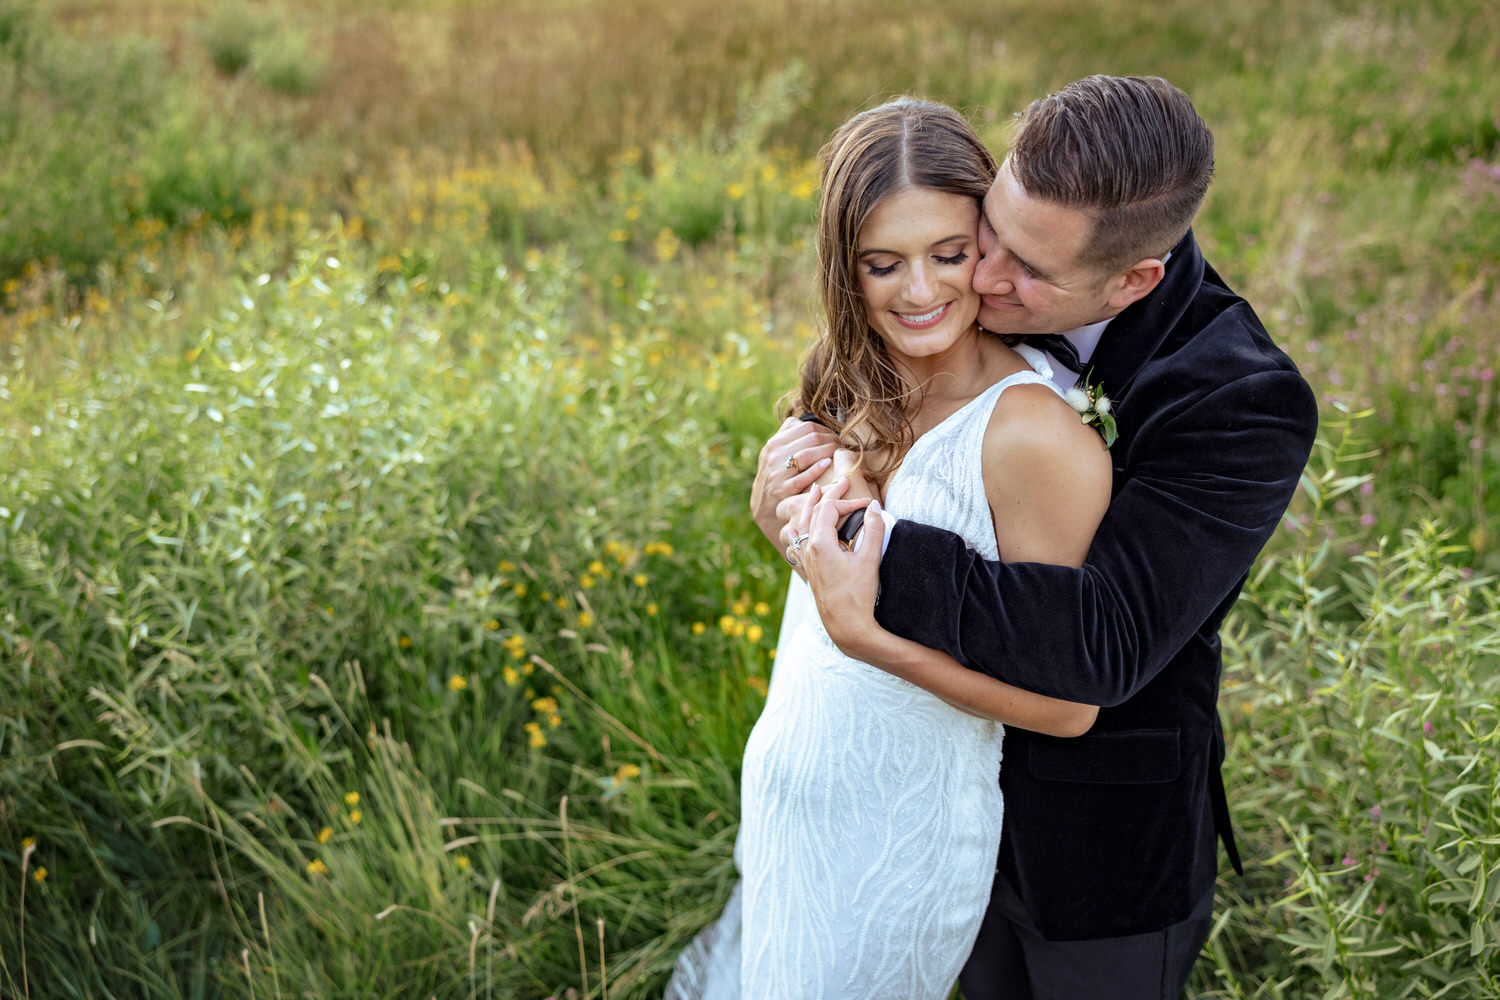 A groom embraces his bride in a green field with yellow and purple wildflowers.